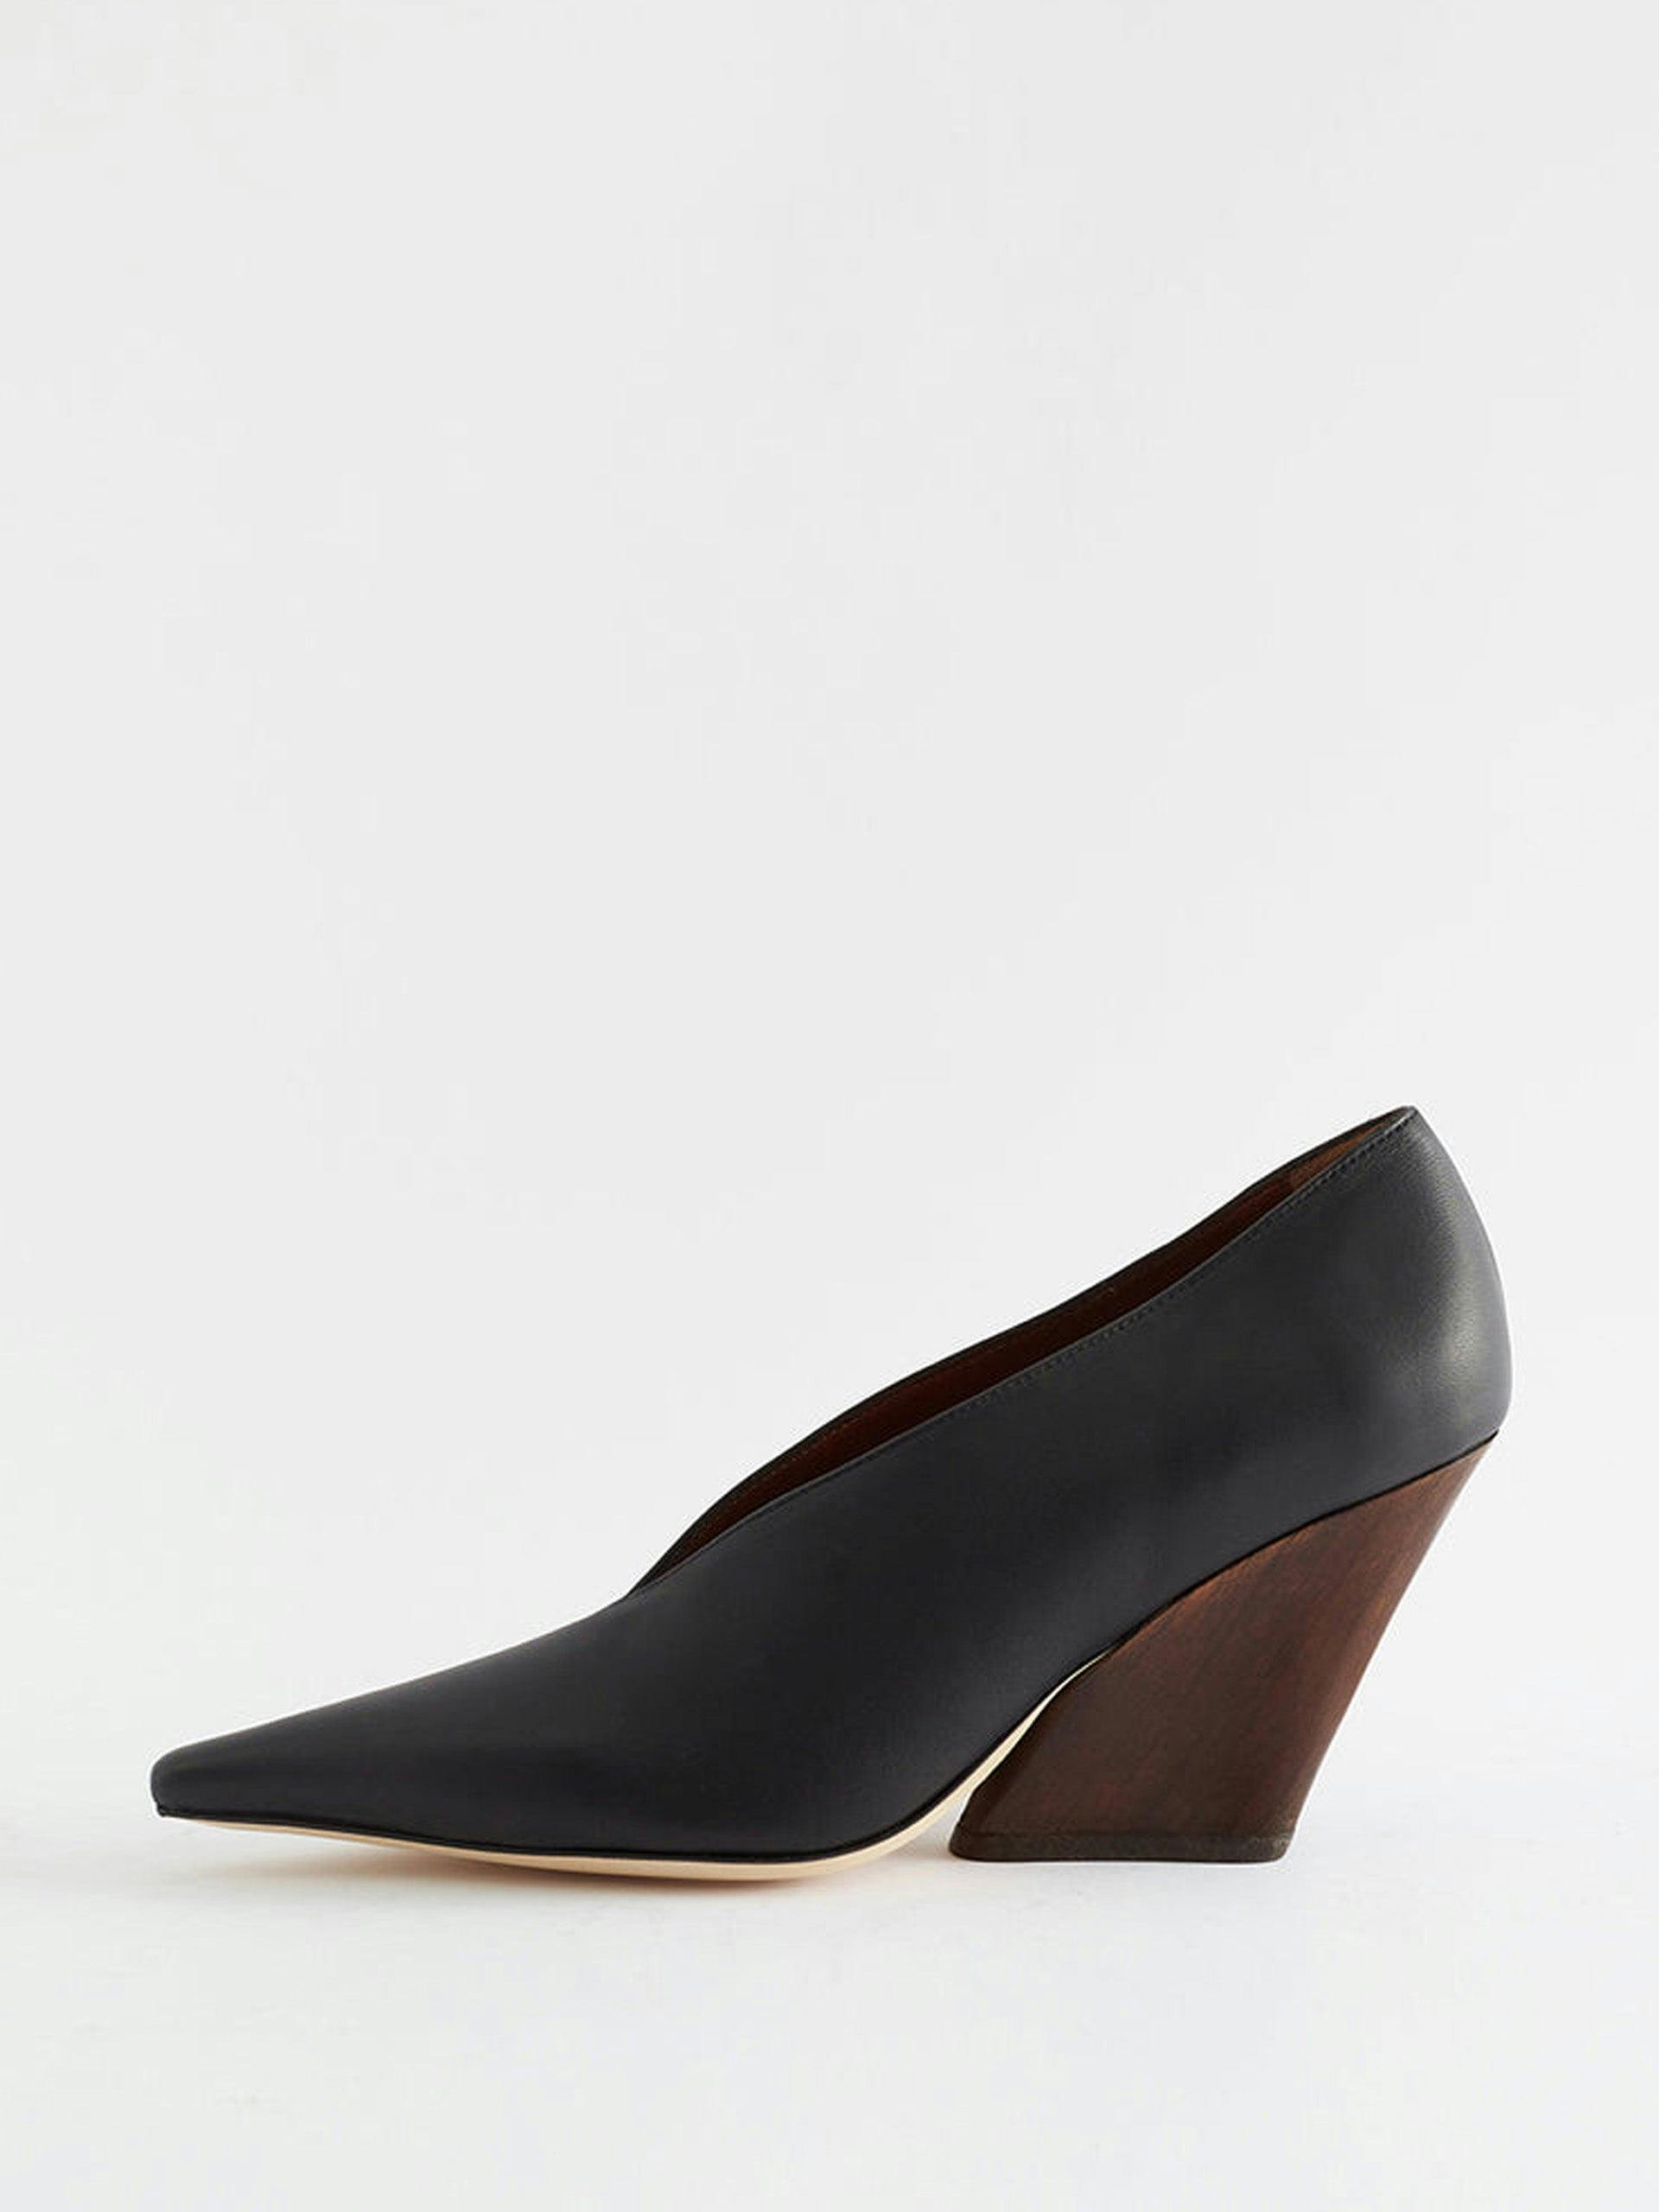 Angled leather pumps